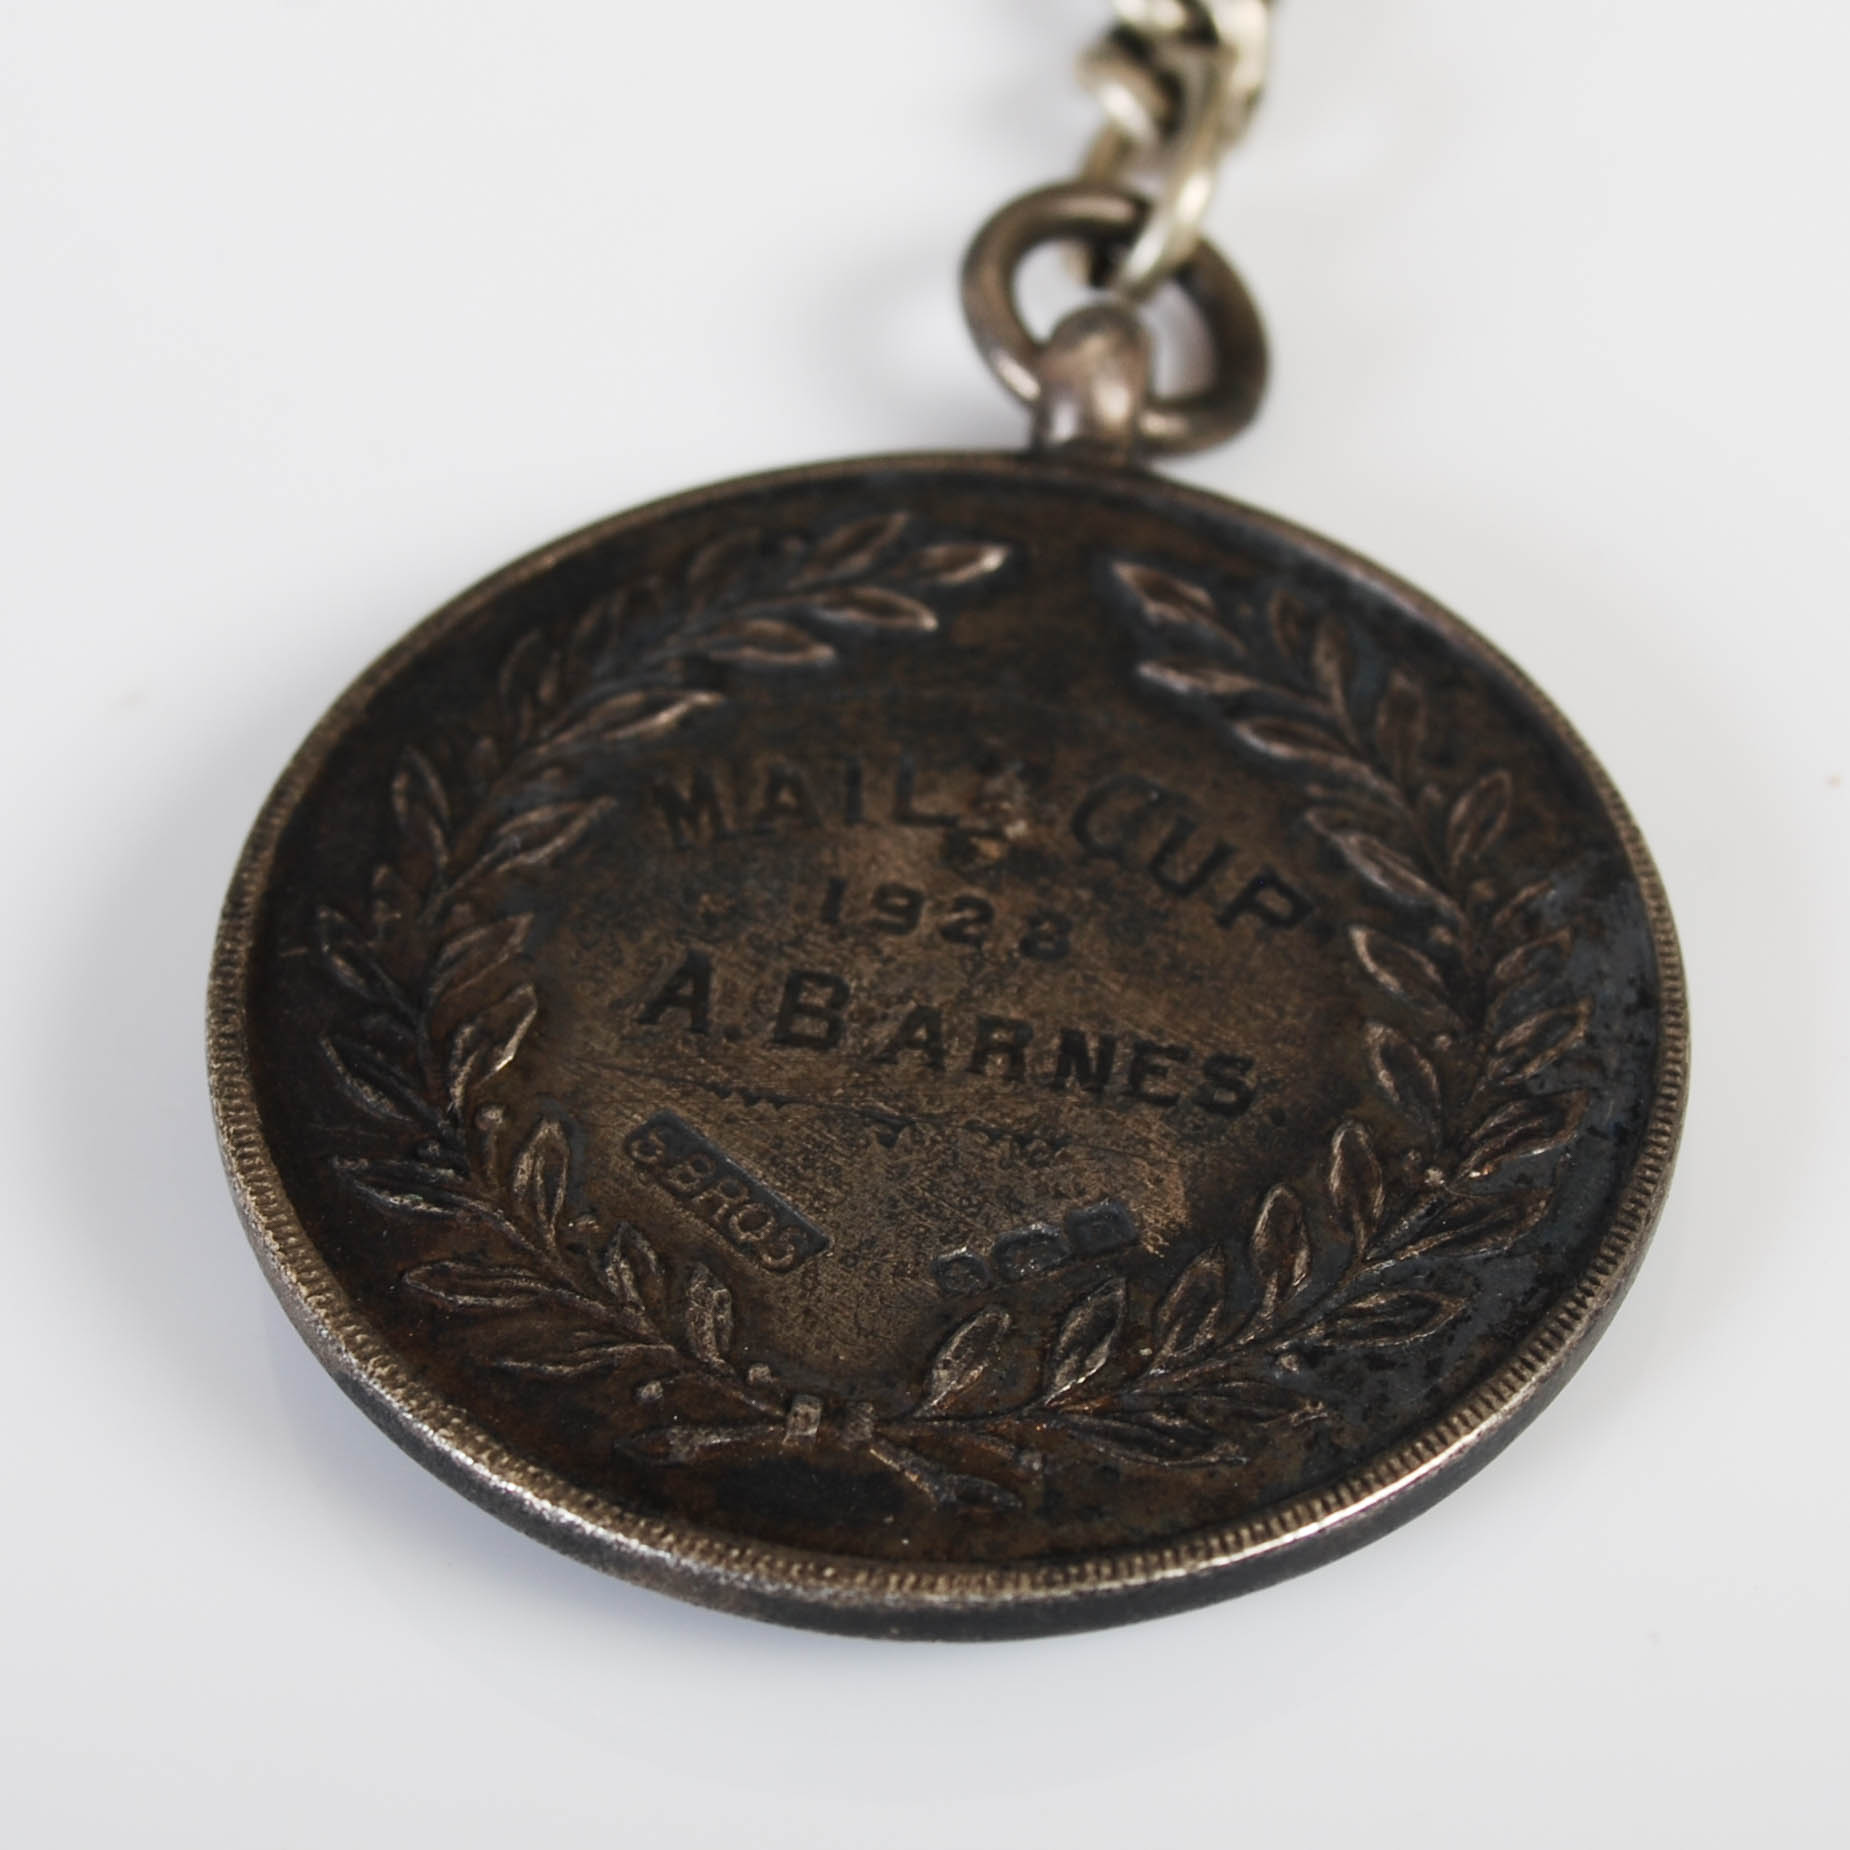 SCOTTISH FOOTBALL MEMORABILIA, A COLLECTION OF MEDALS AND PHOTOGRAPHS RELATING TO ARTHUR BARNES, - Image 6 of 10